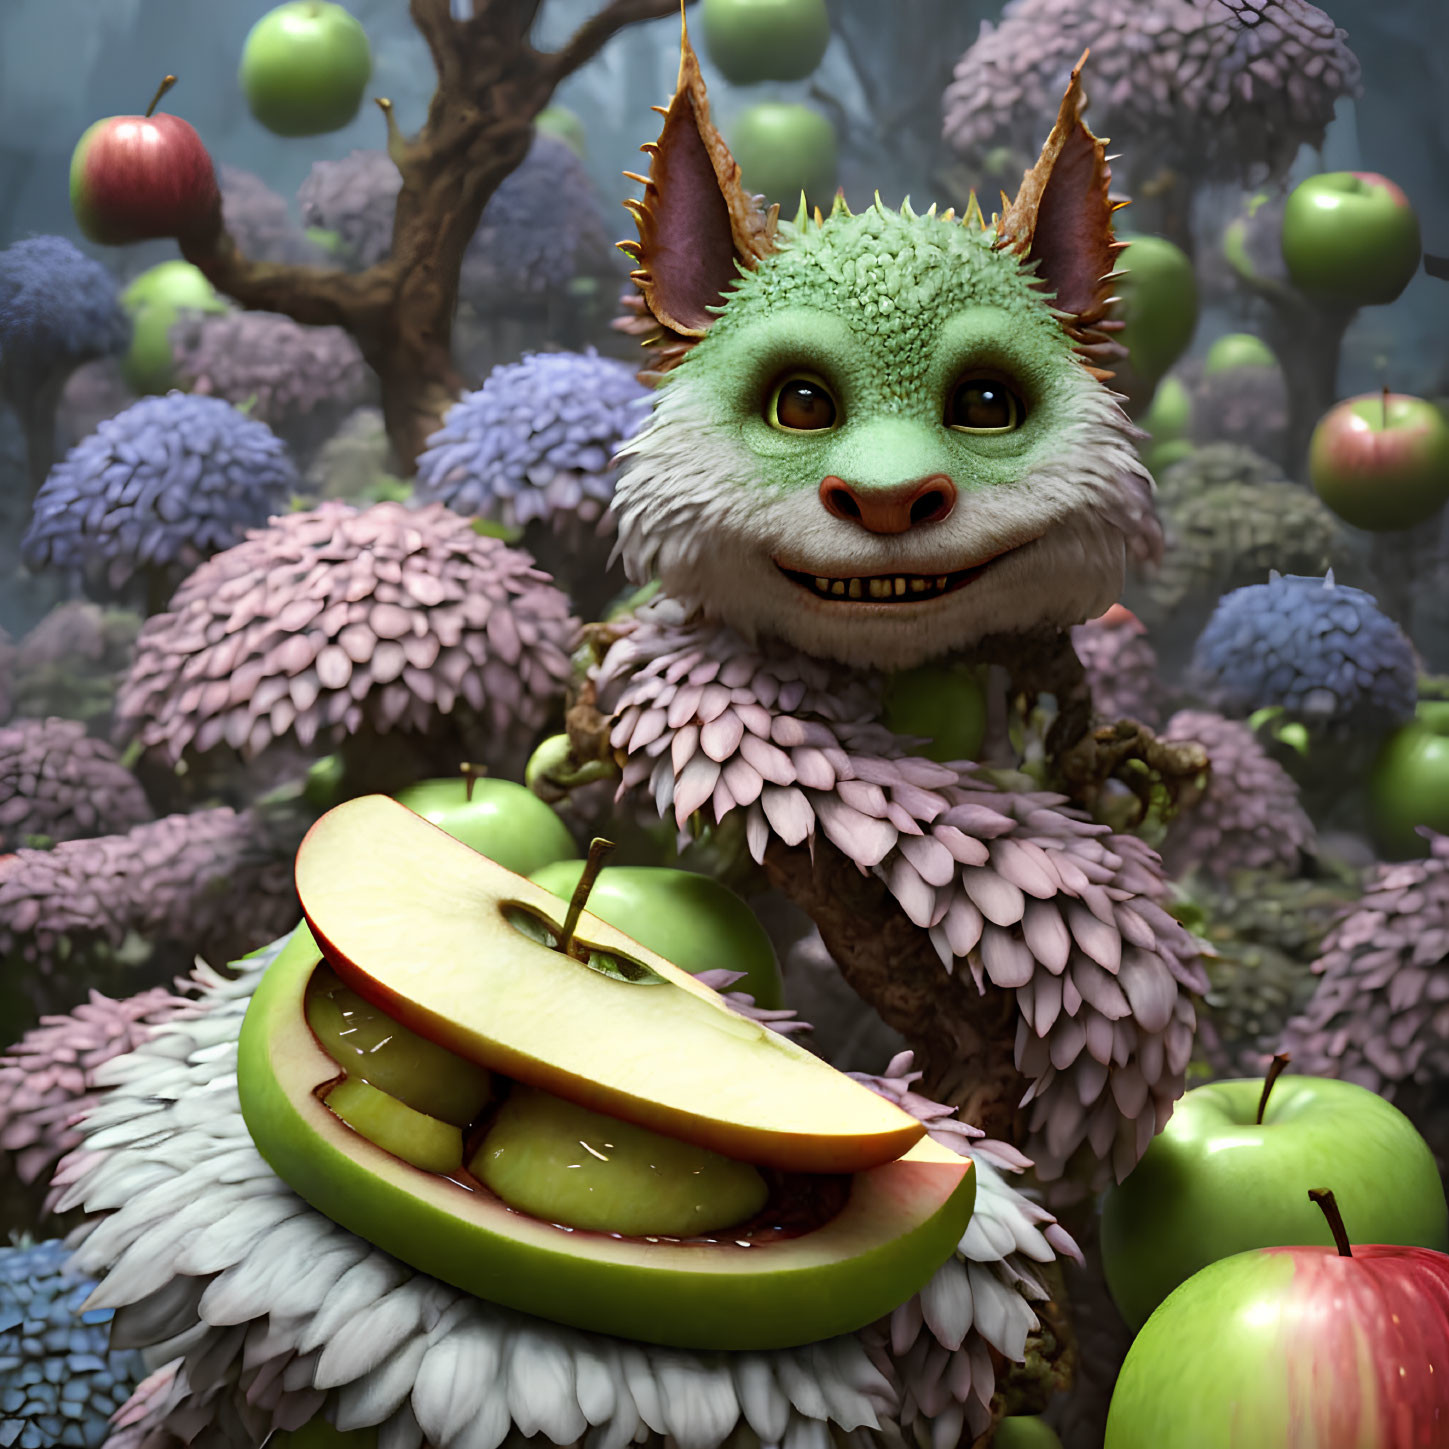 Green-furred creature with apple and flowers in whimsical scene